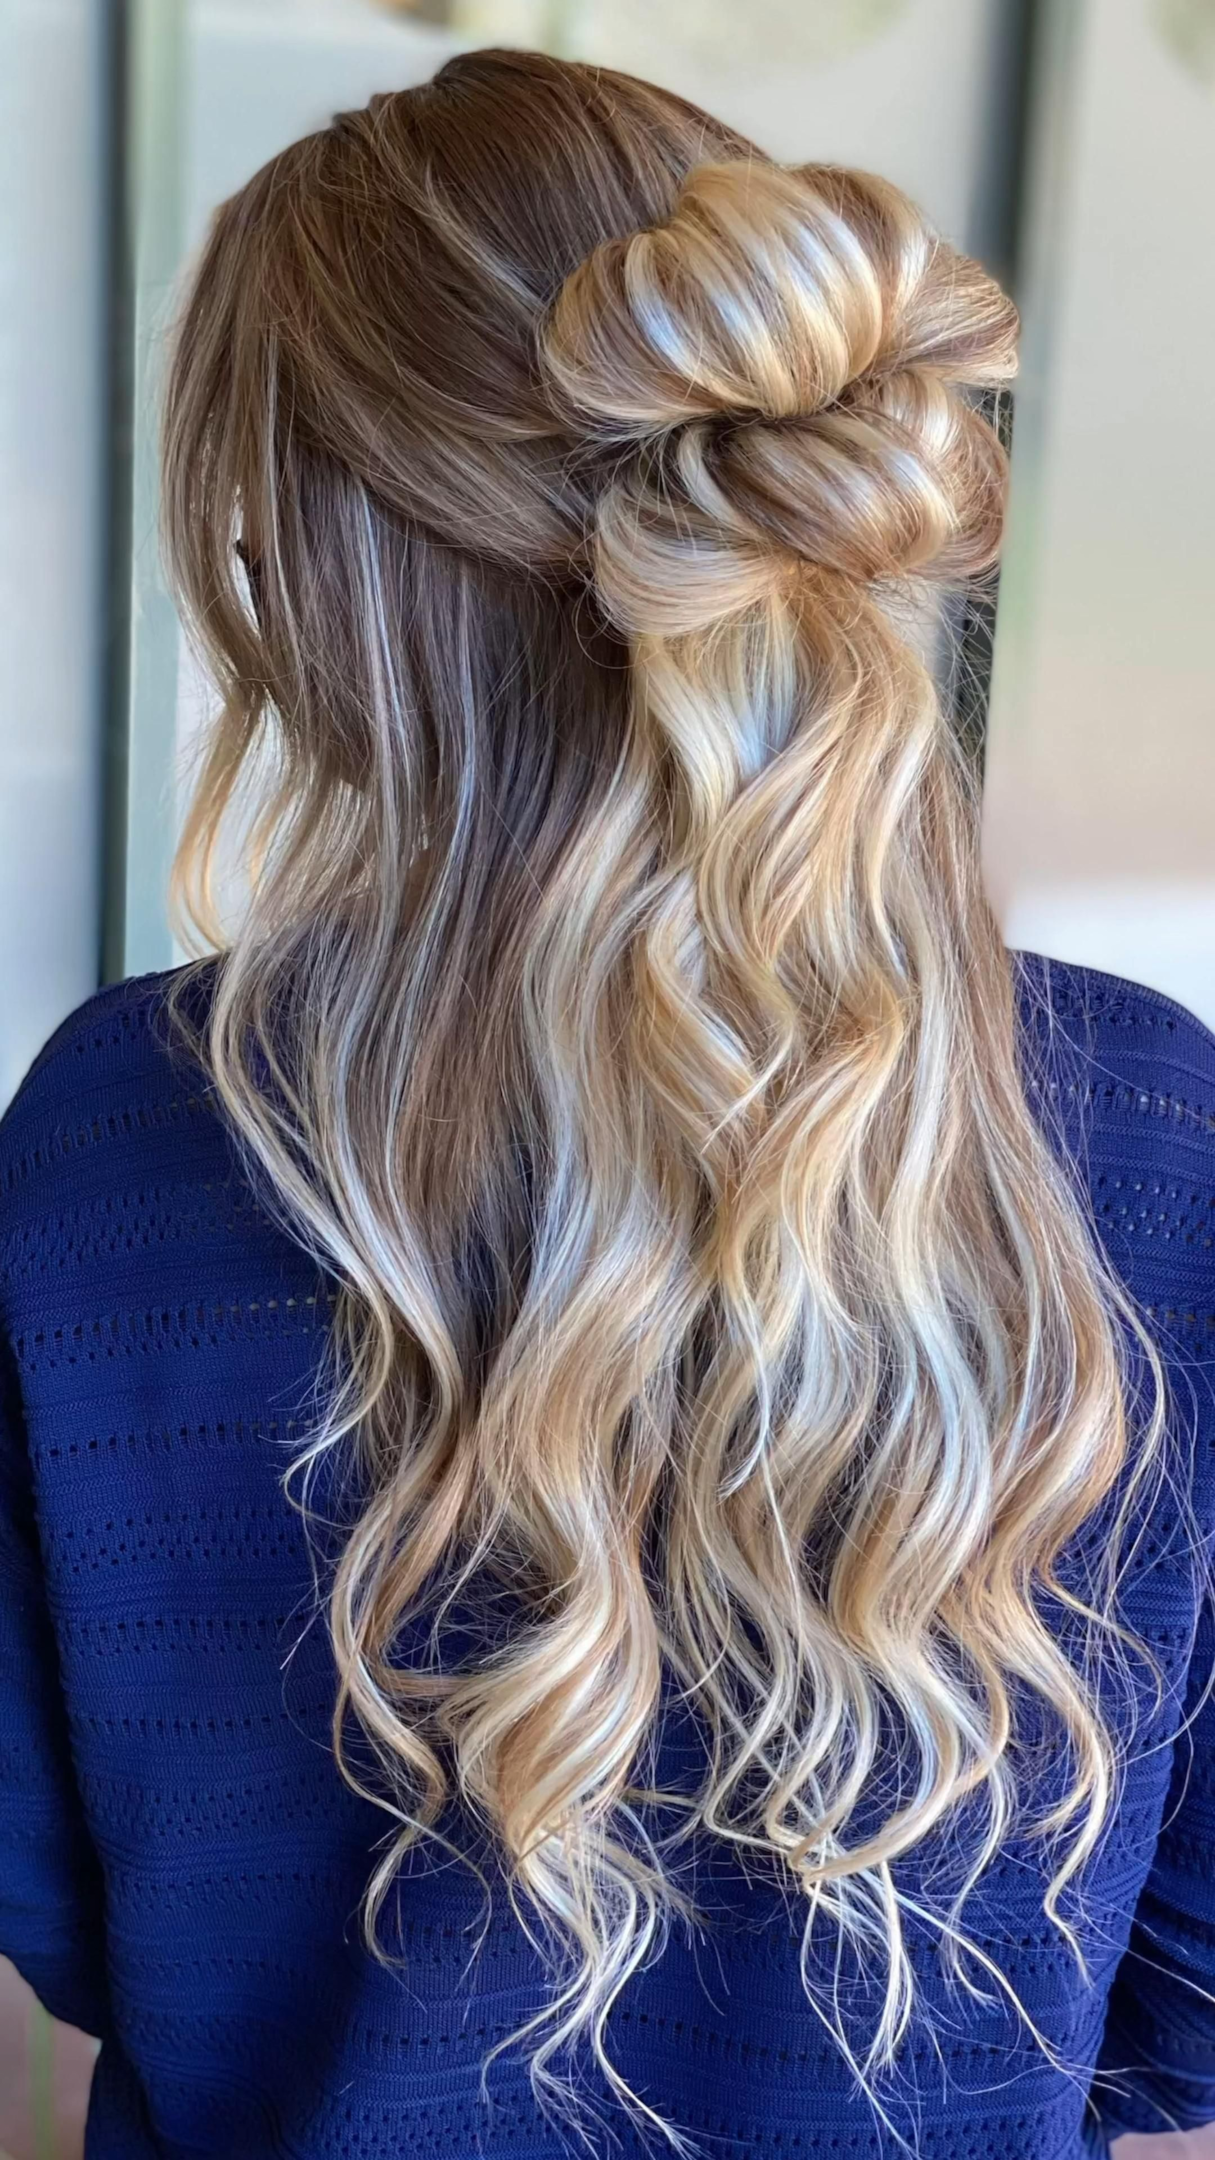 An image showcasing different prom hair ideas for DIY hairstyles